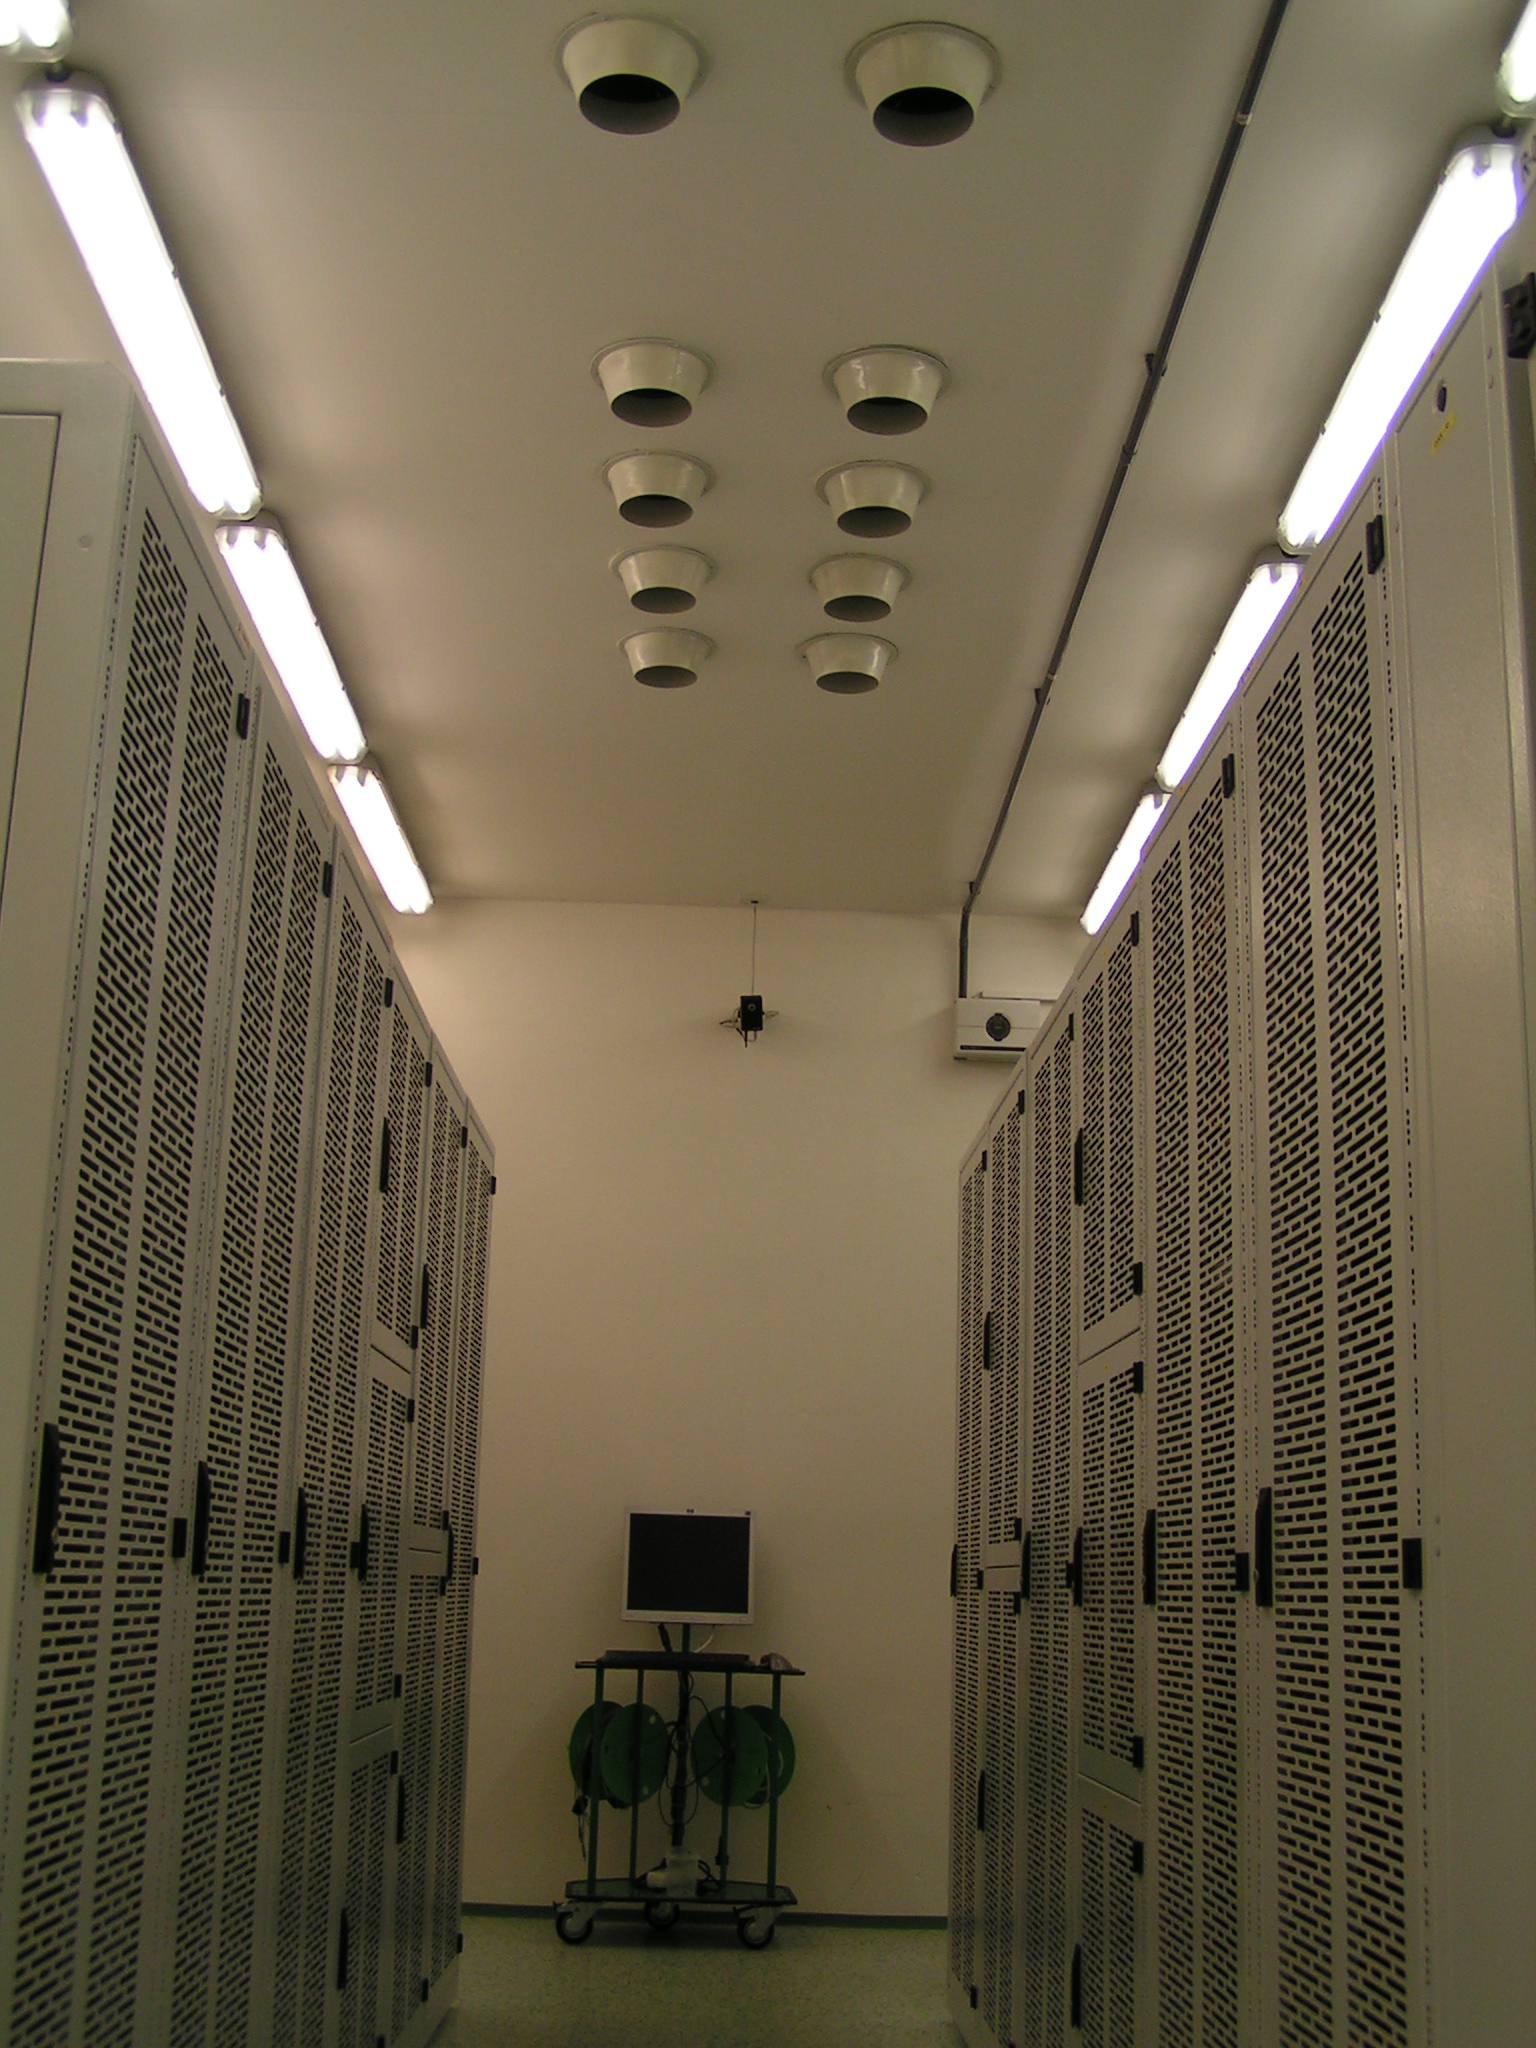 Coolhousing data center is known for providing high level of professional services at affordable prices.